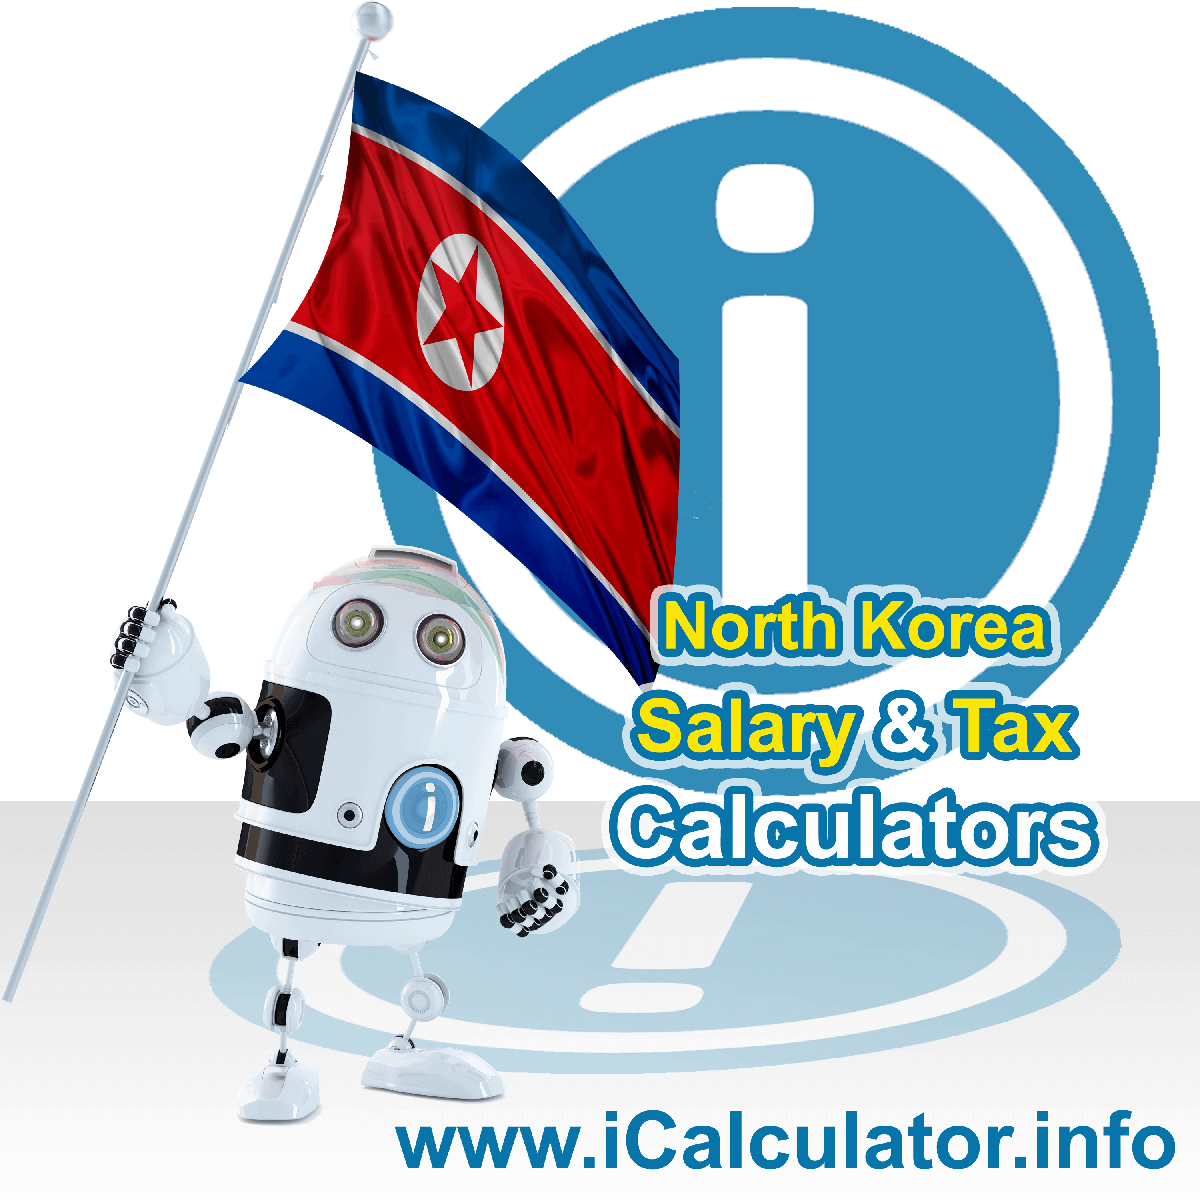 North Korea Tax Calculator. This image shows the North Korea flag and information relating to the tax formula for the North Korea Salary Calculator